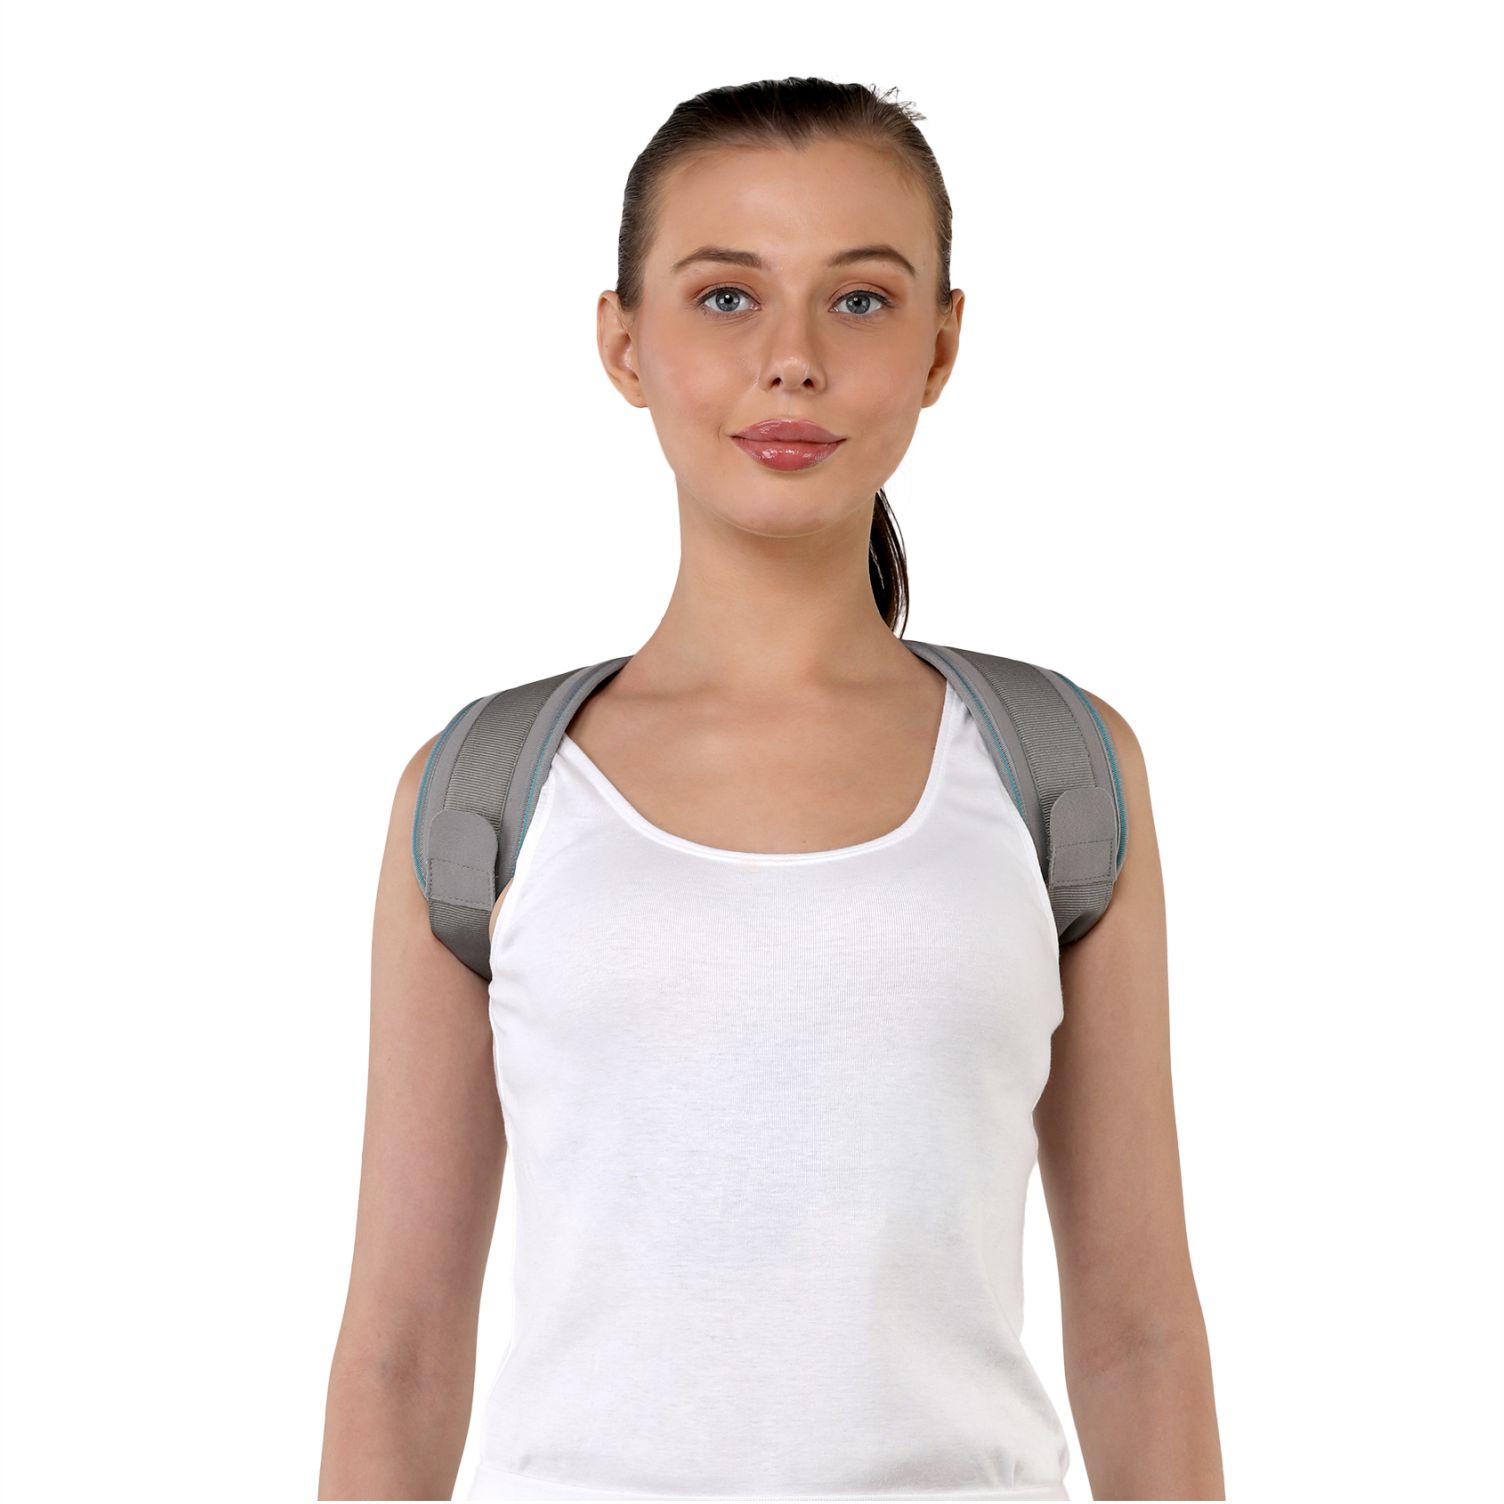 Clavicle Brace With Buckle (13)